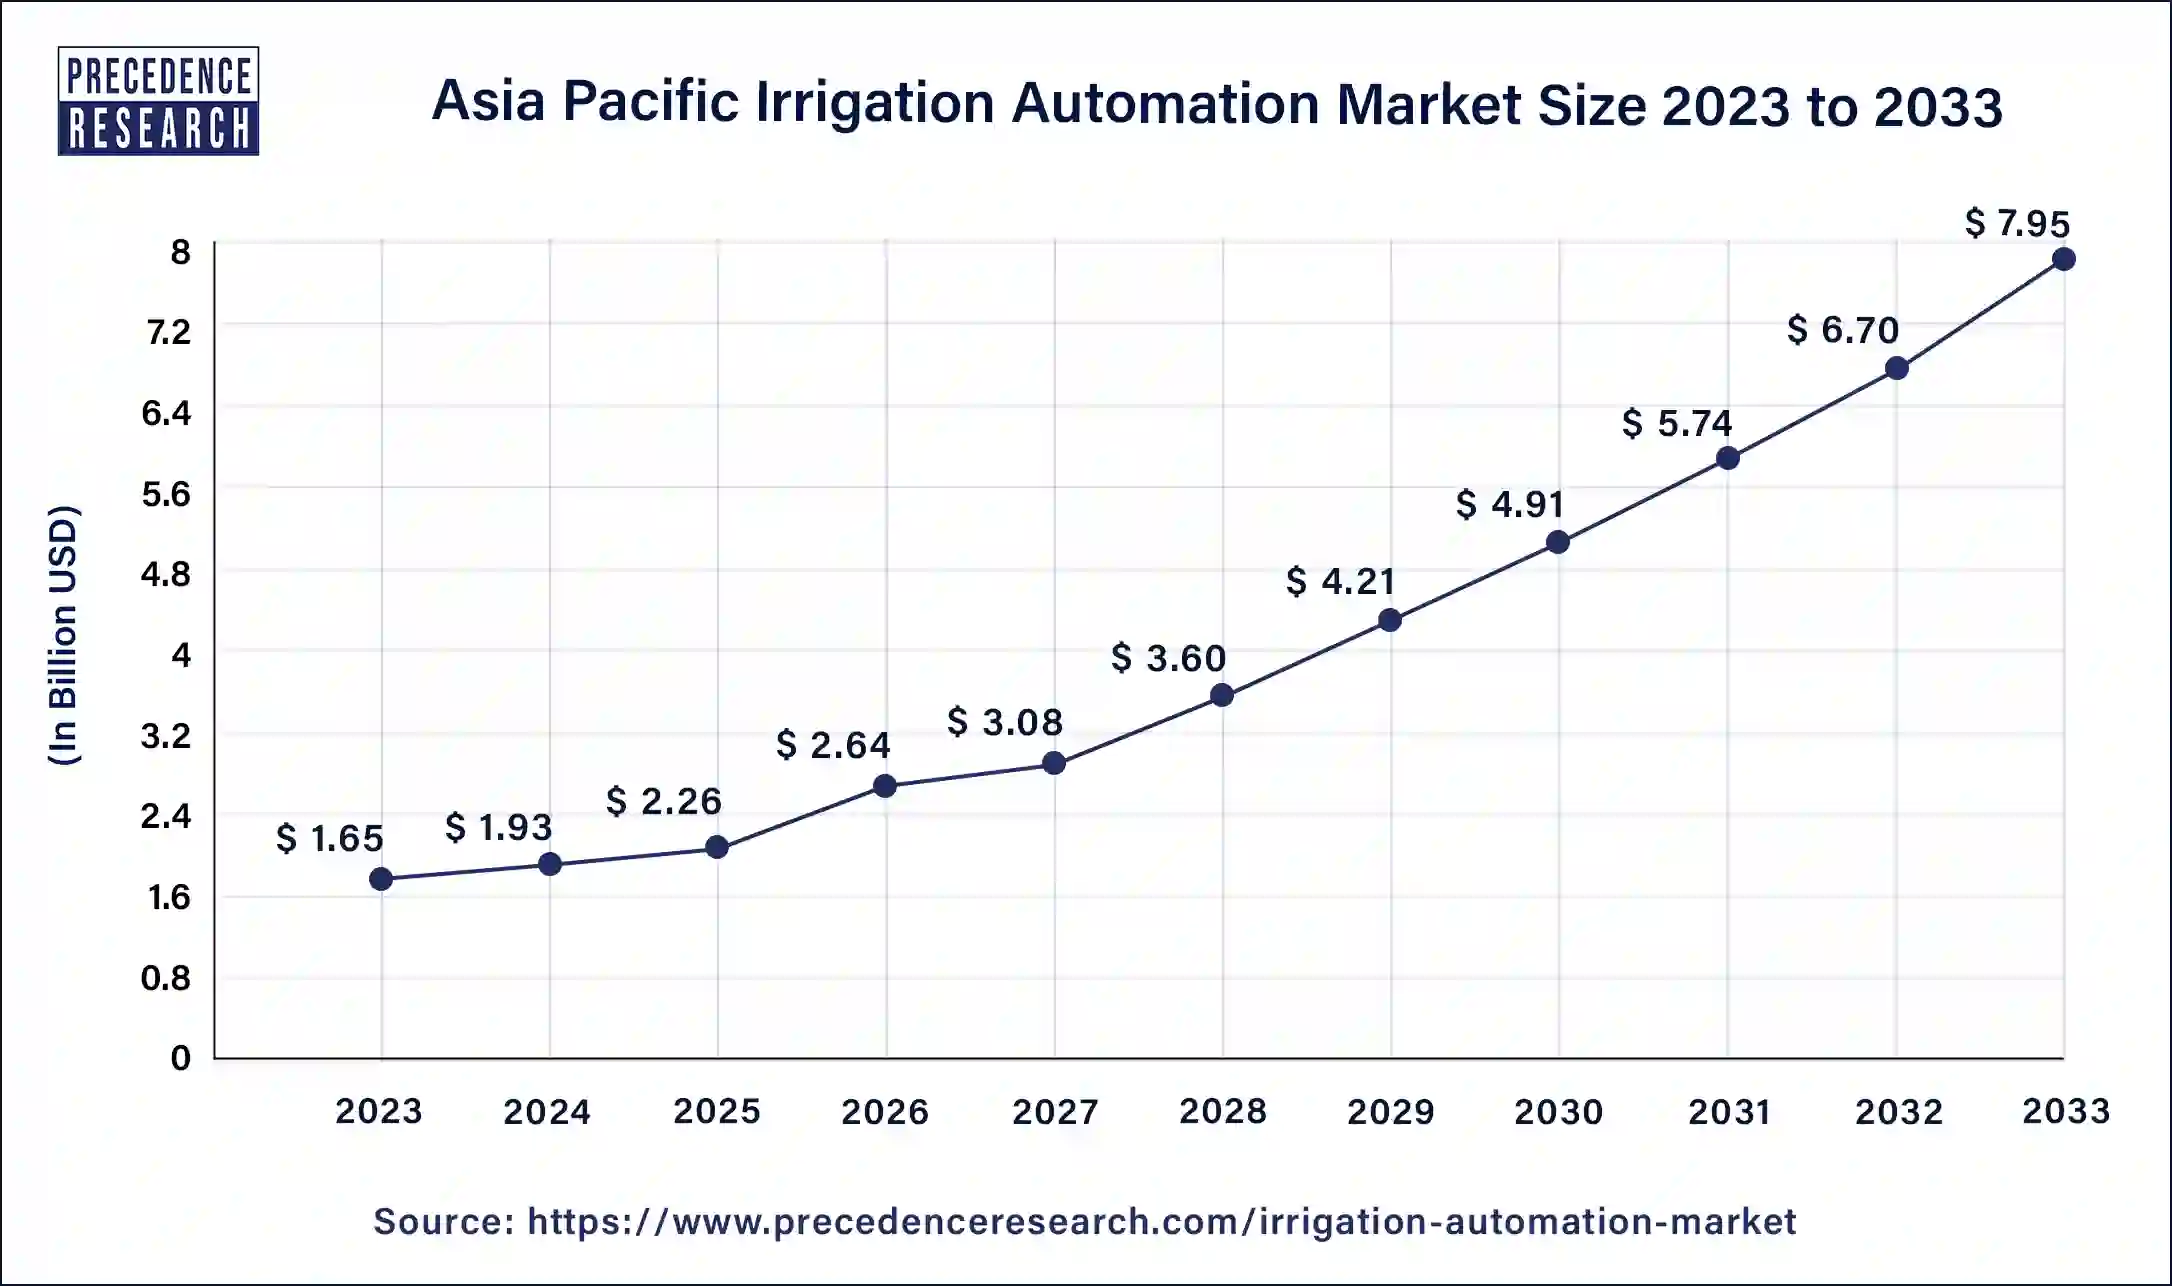 Asia Pacific Irrigation Automation Market Size 2024 to 2033